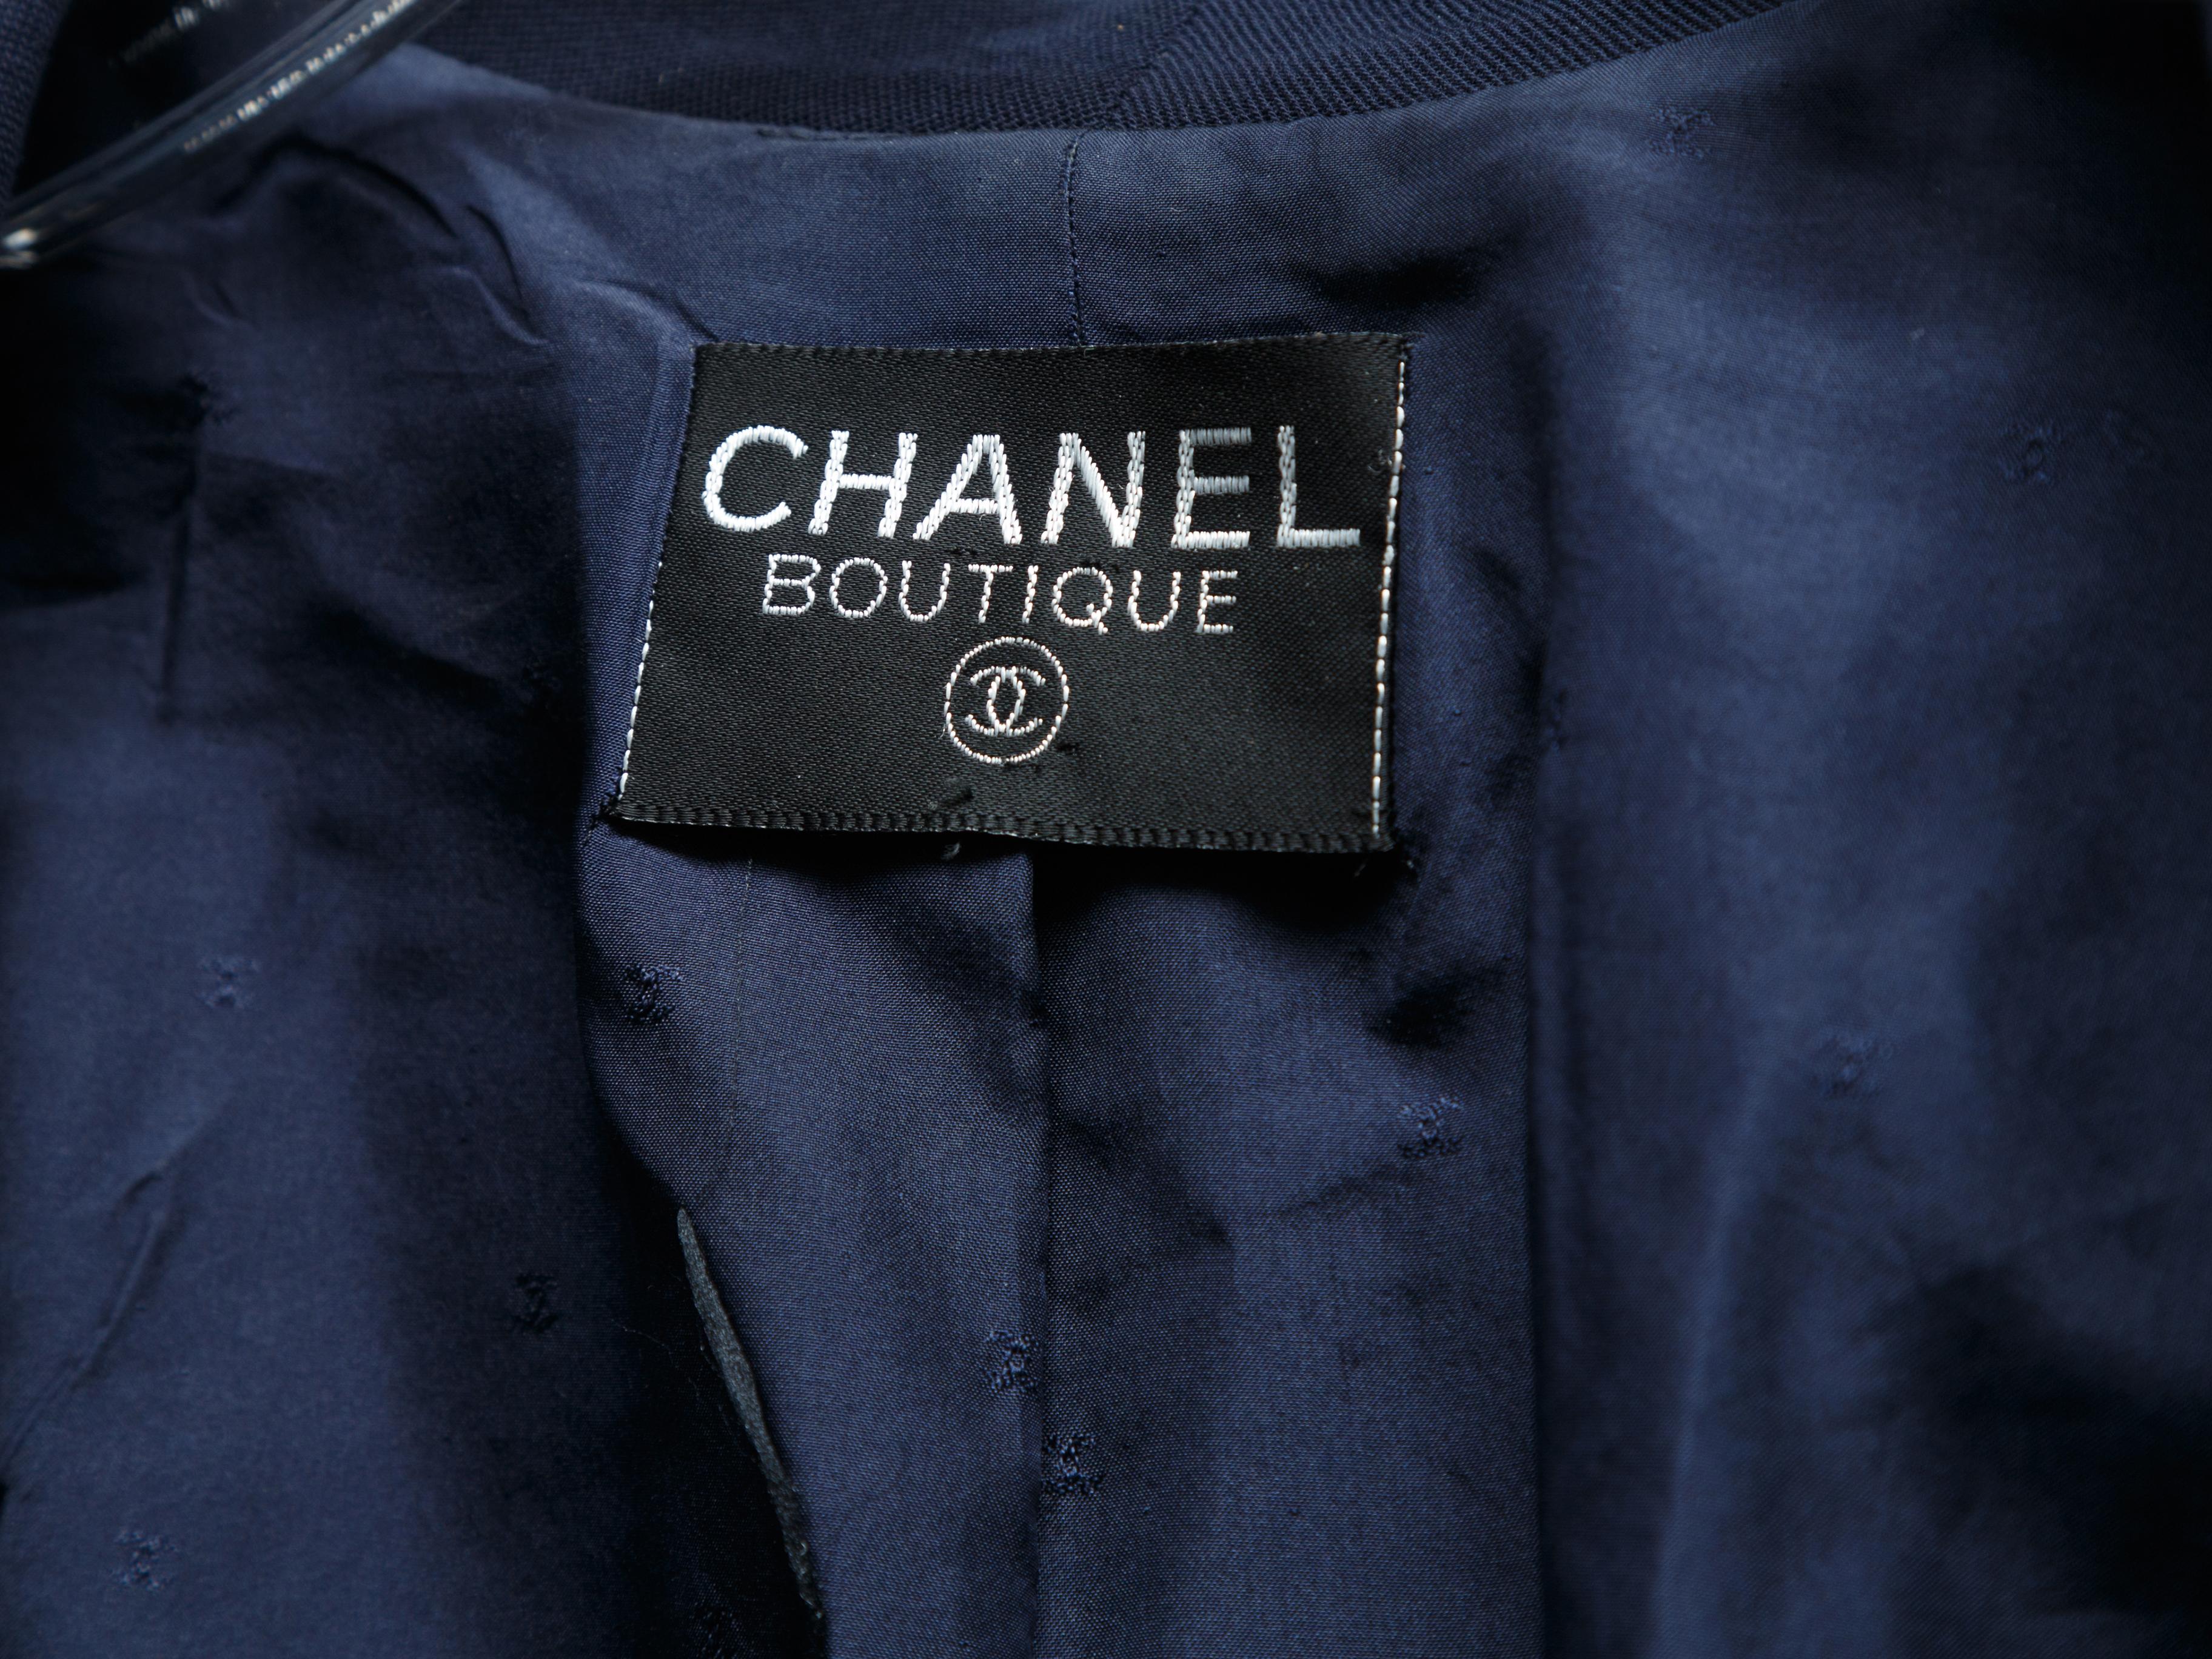 Product details: Vintage navy open front jacket by Chanel Boutique. Notch collar. Three patch pockets. 32